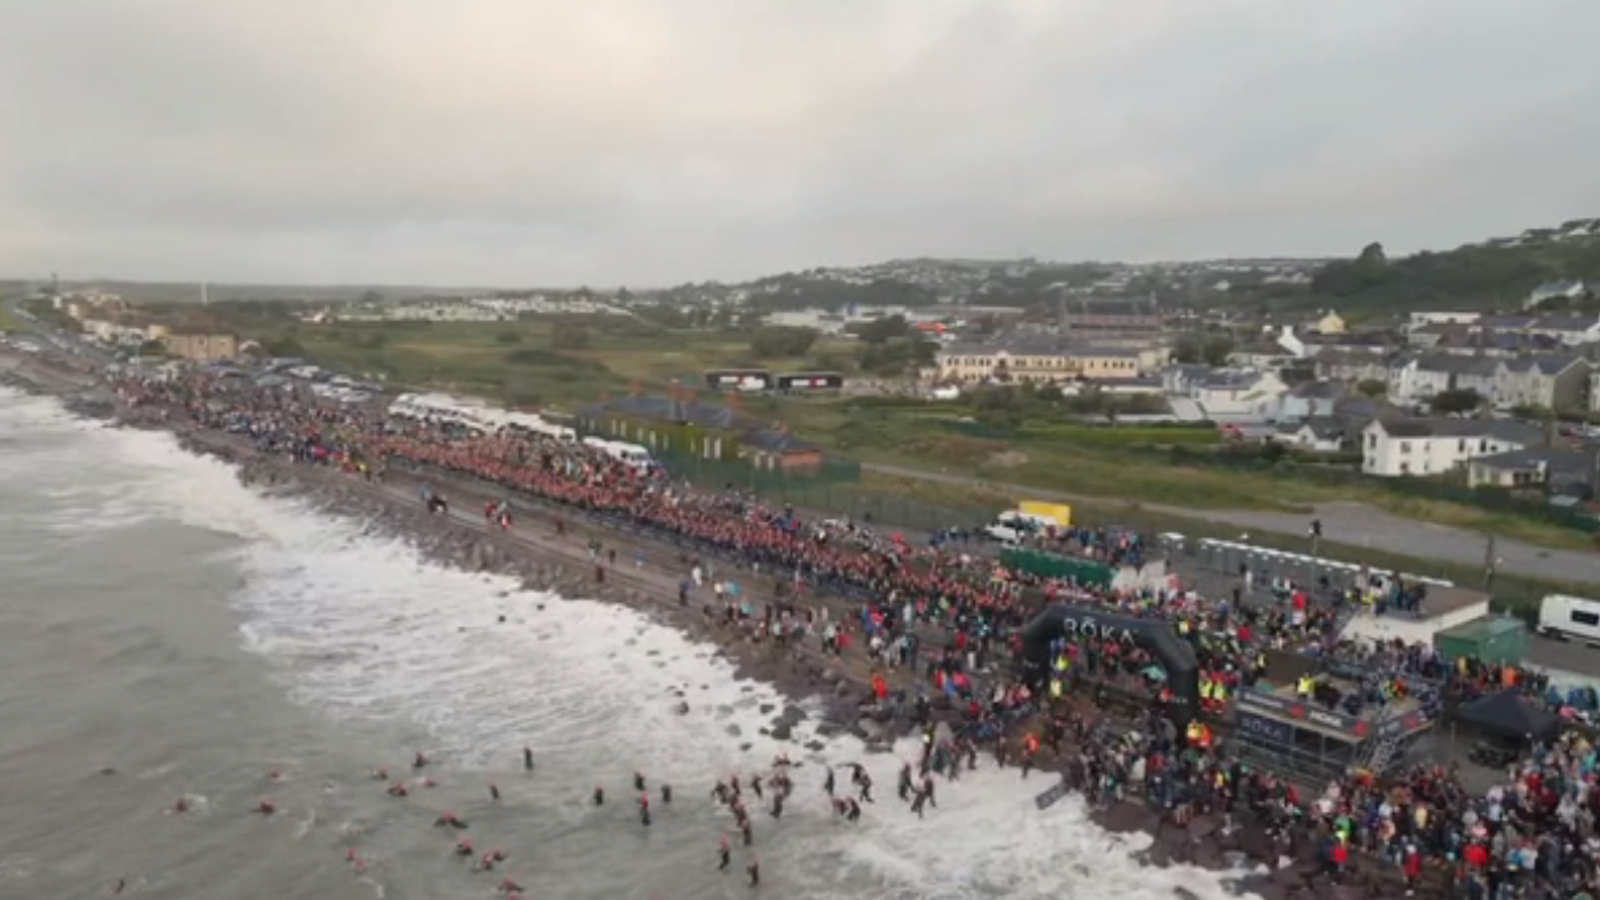 Two men die in Cork Ironman competition